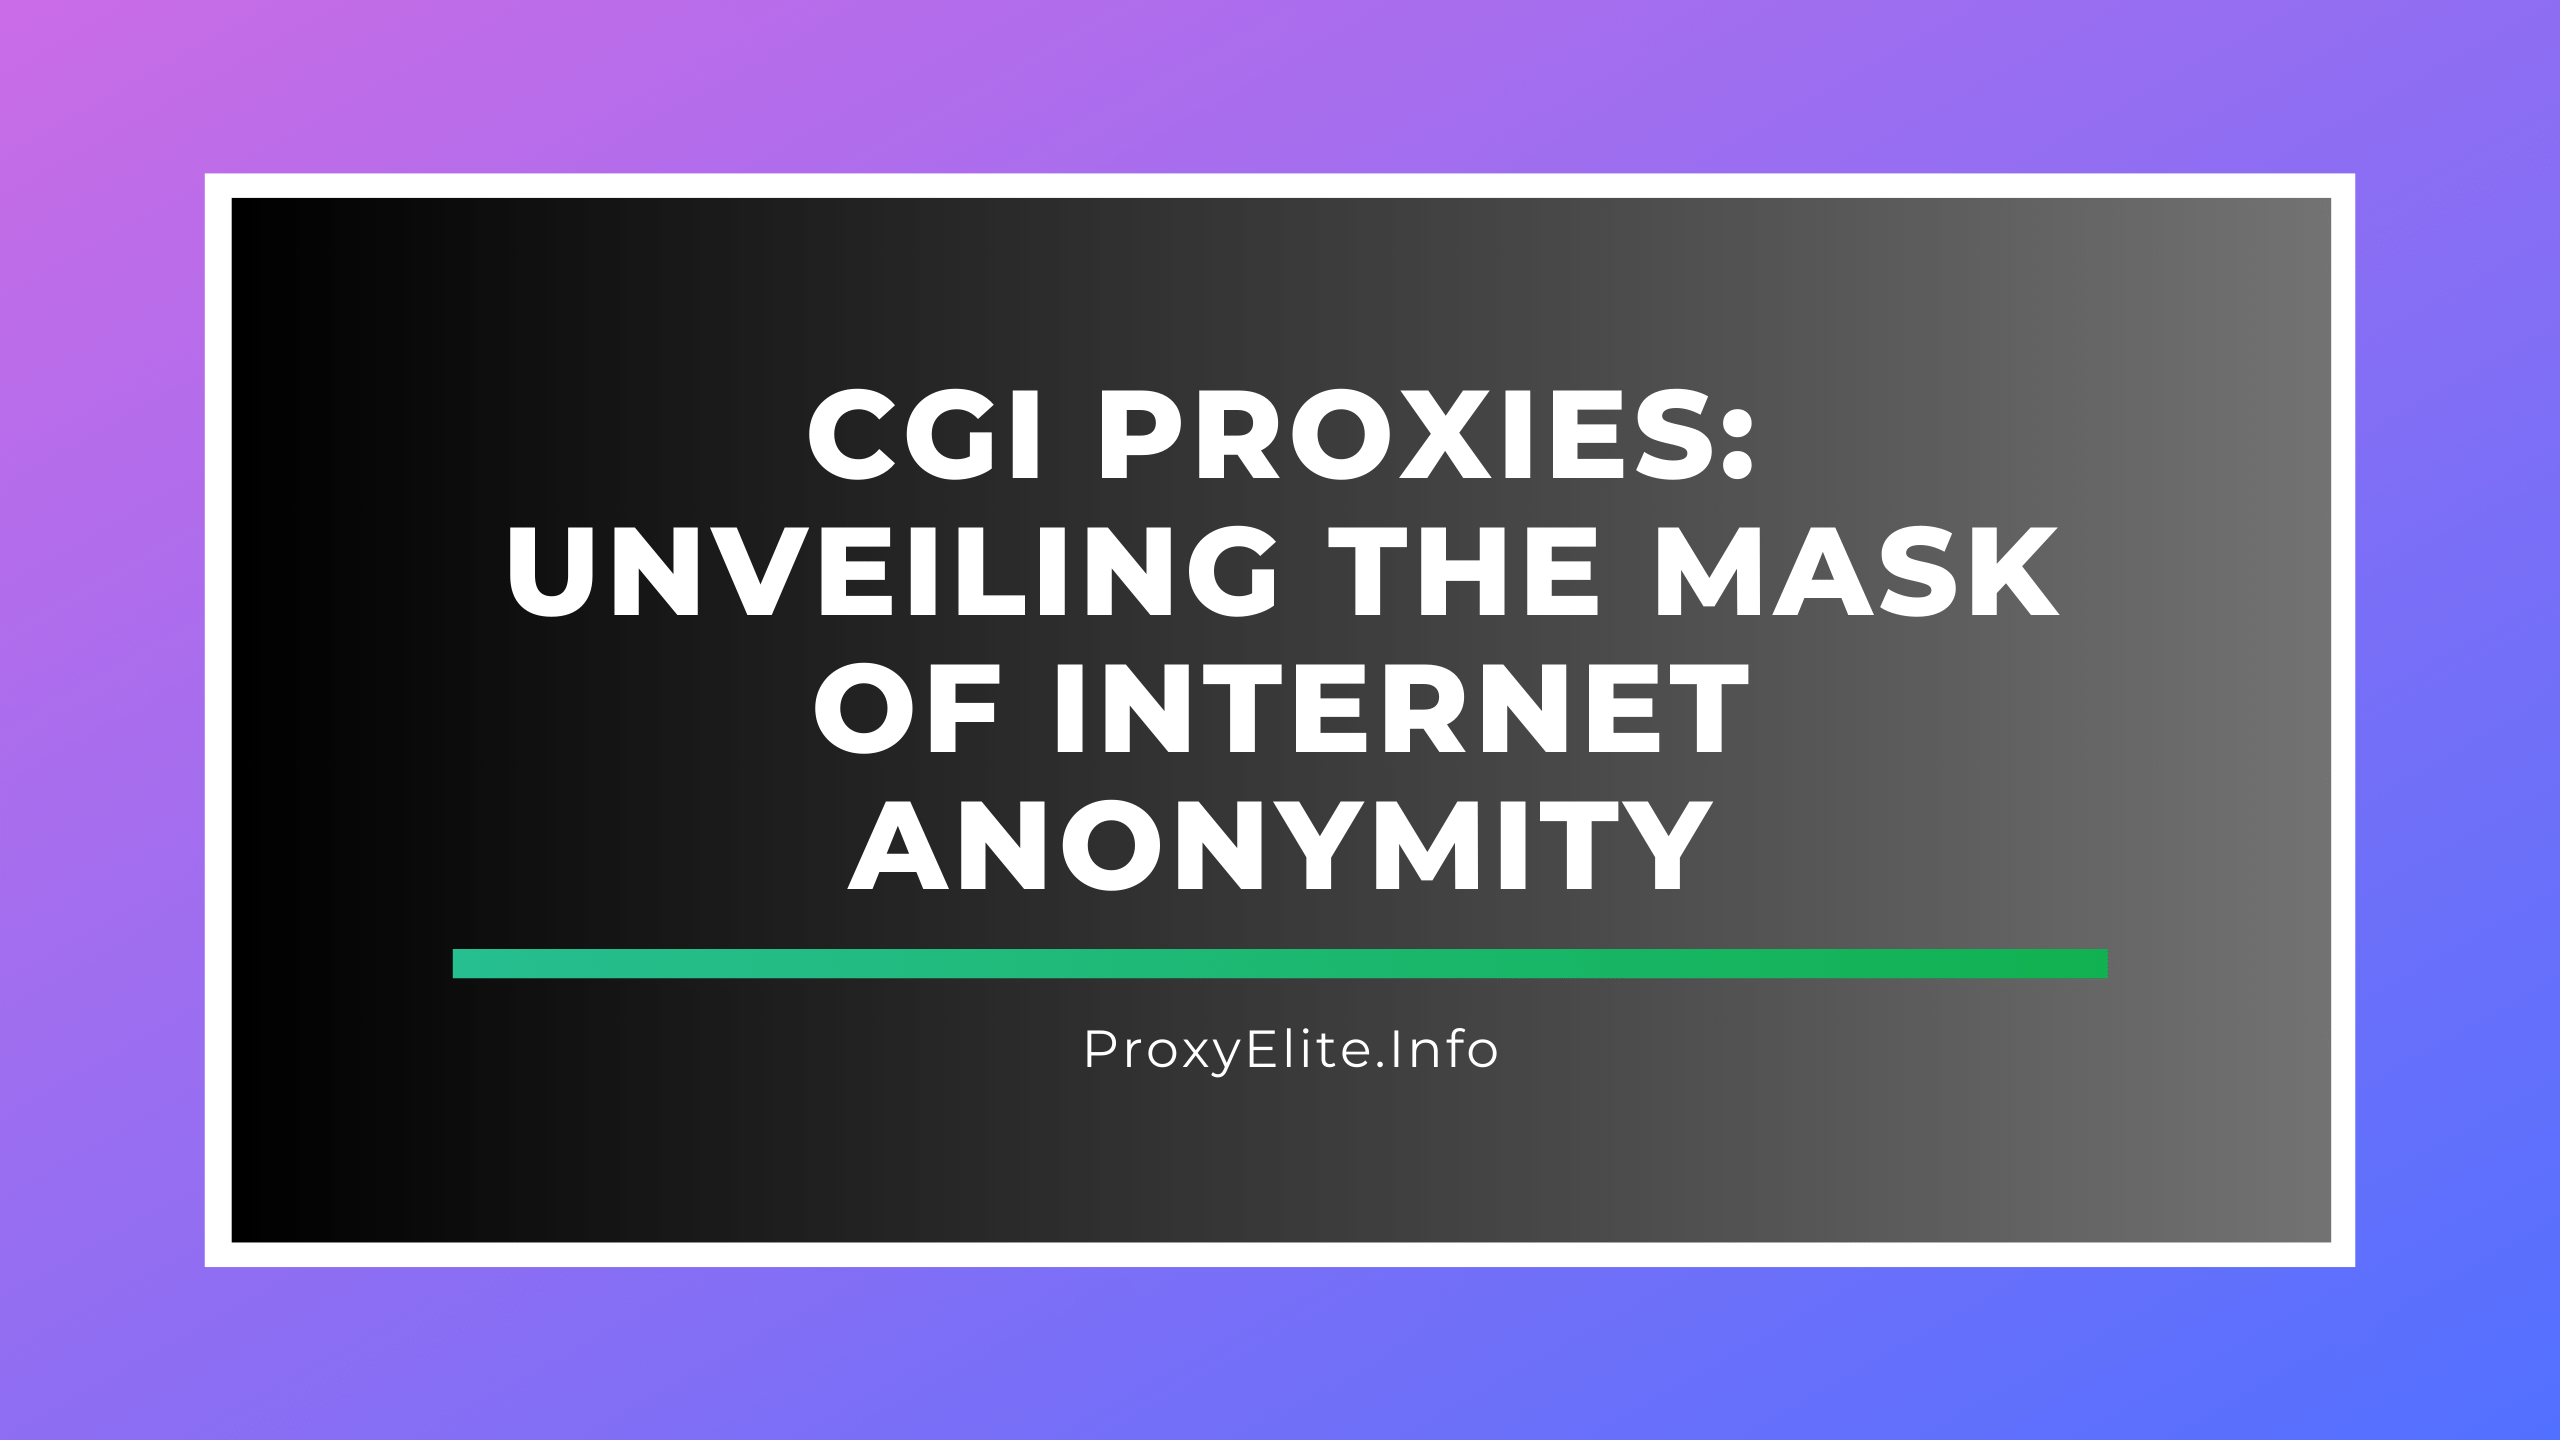 CGI Proxies: Unveiling the Mask of Internet Anonymity